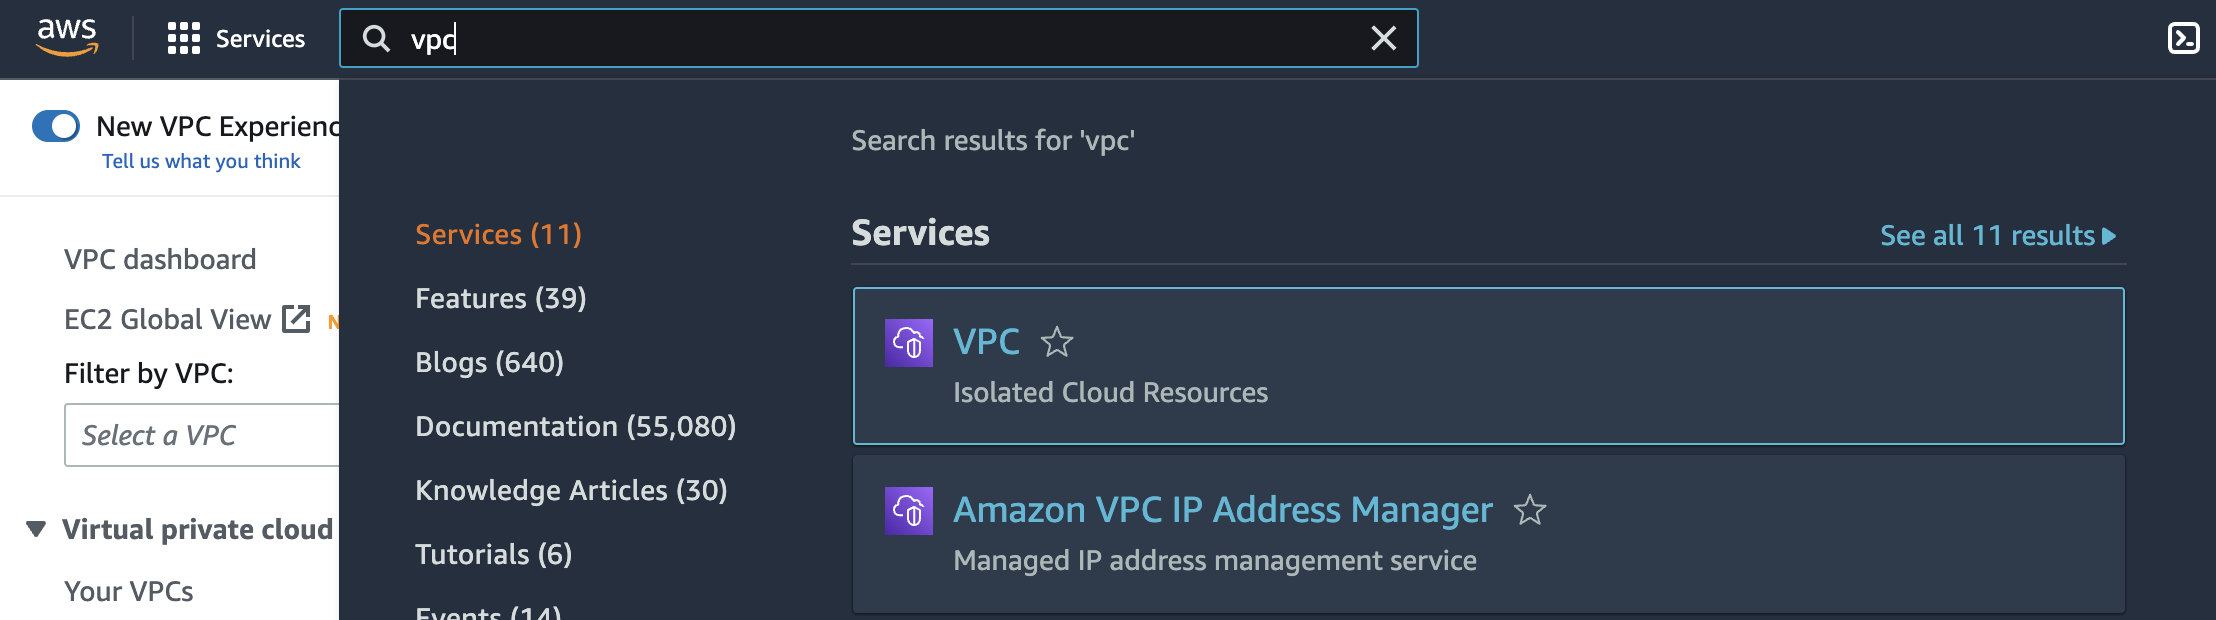 Search for "VPC" in the search box at the top.